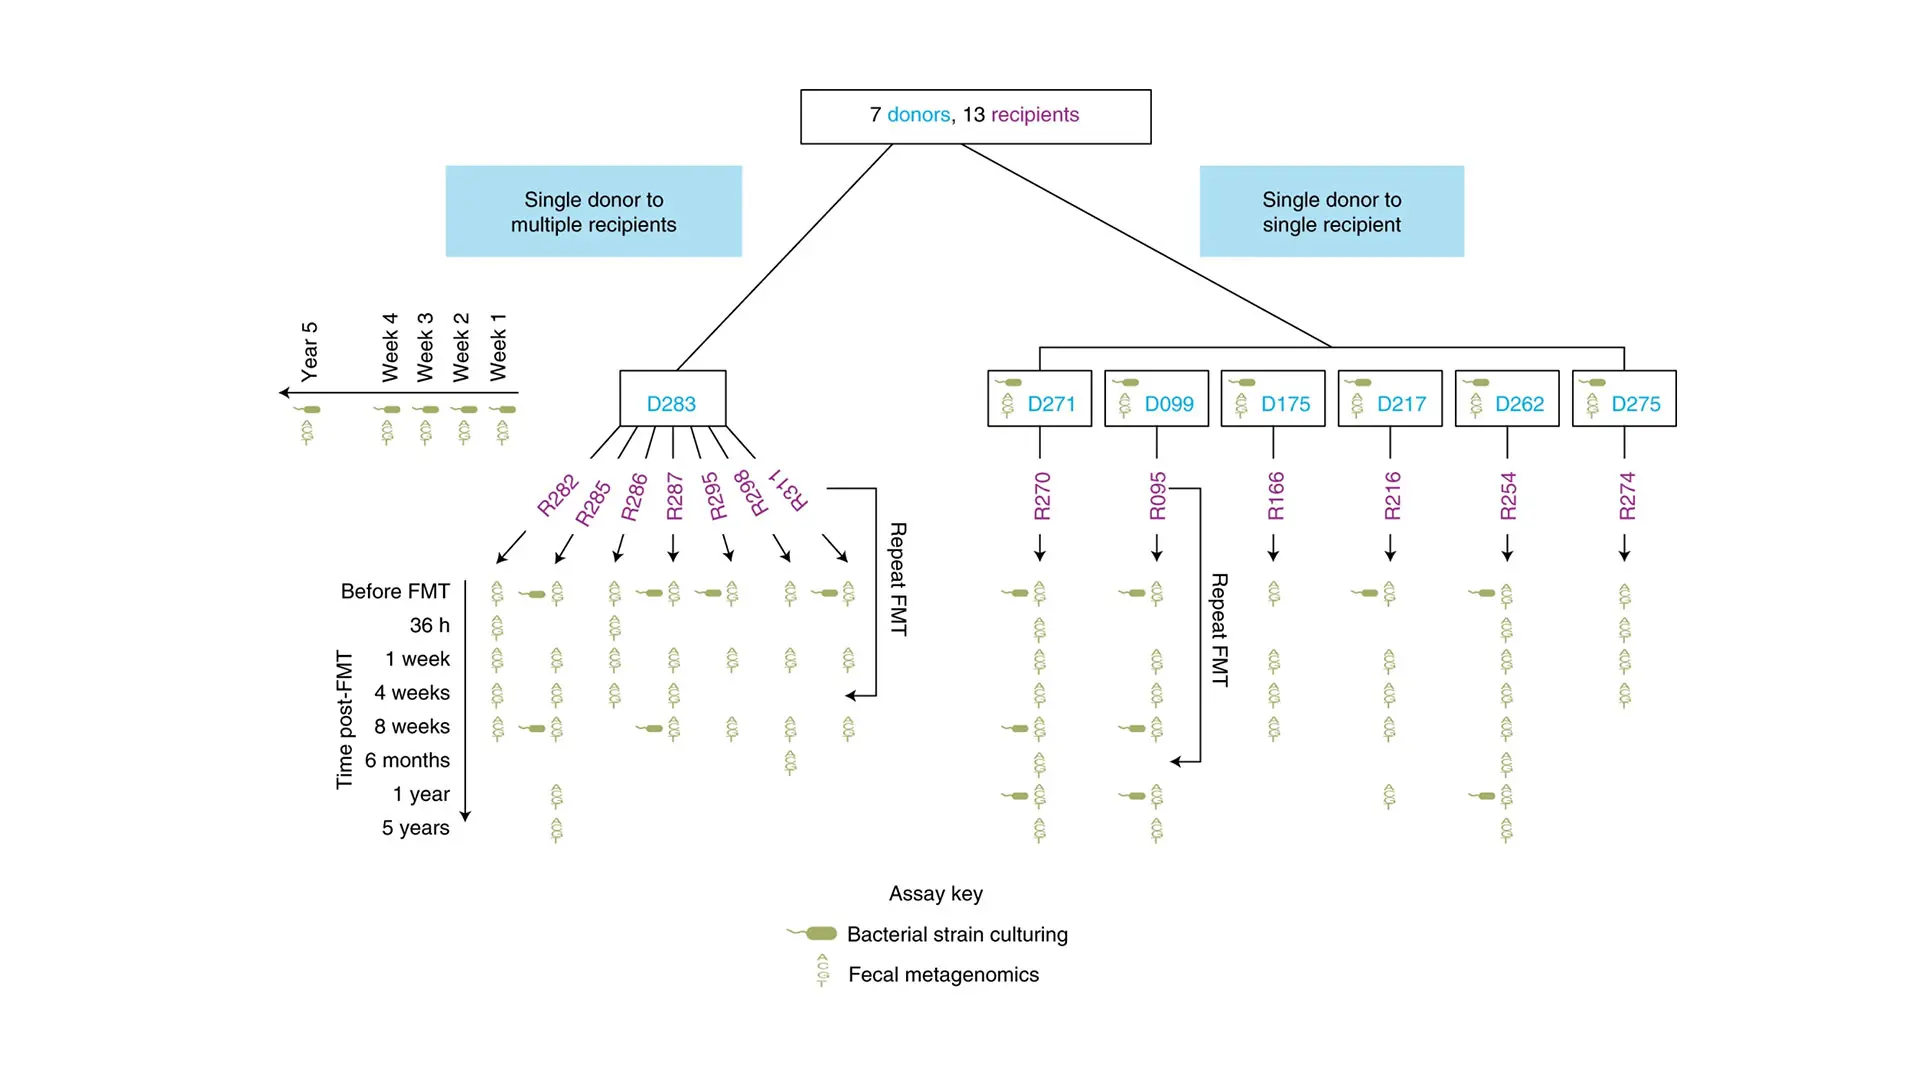 Overview of the FMT study design including donors, recipients, and time points when metagenomic sequencing and bacterial strain culturing were performed on fecal samples